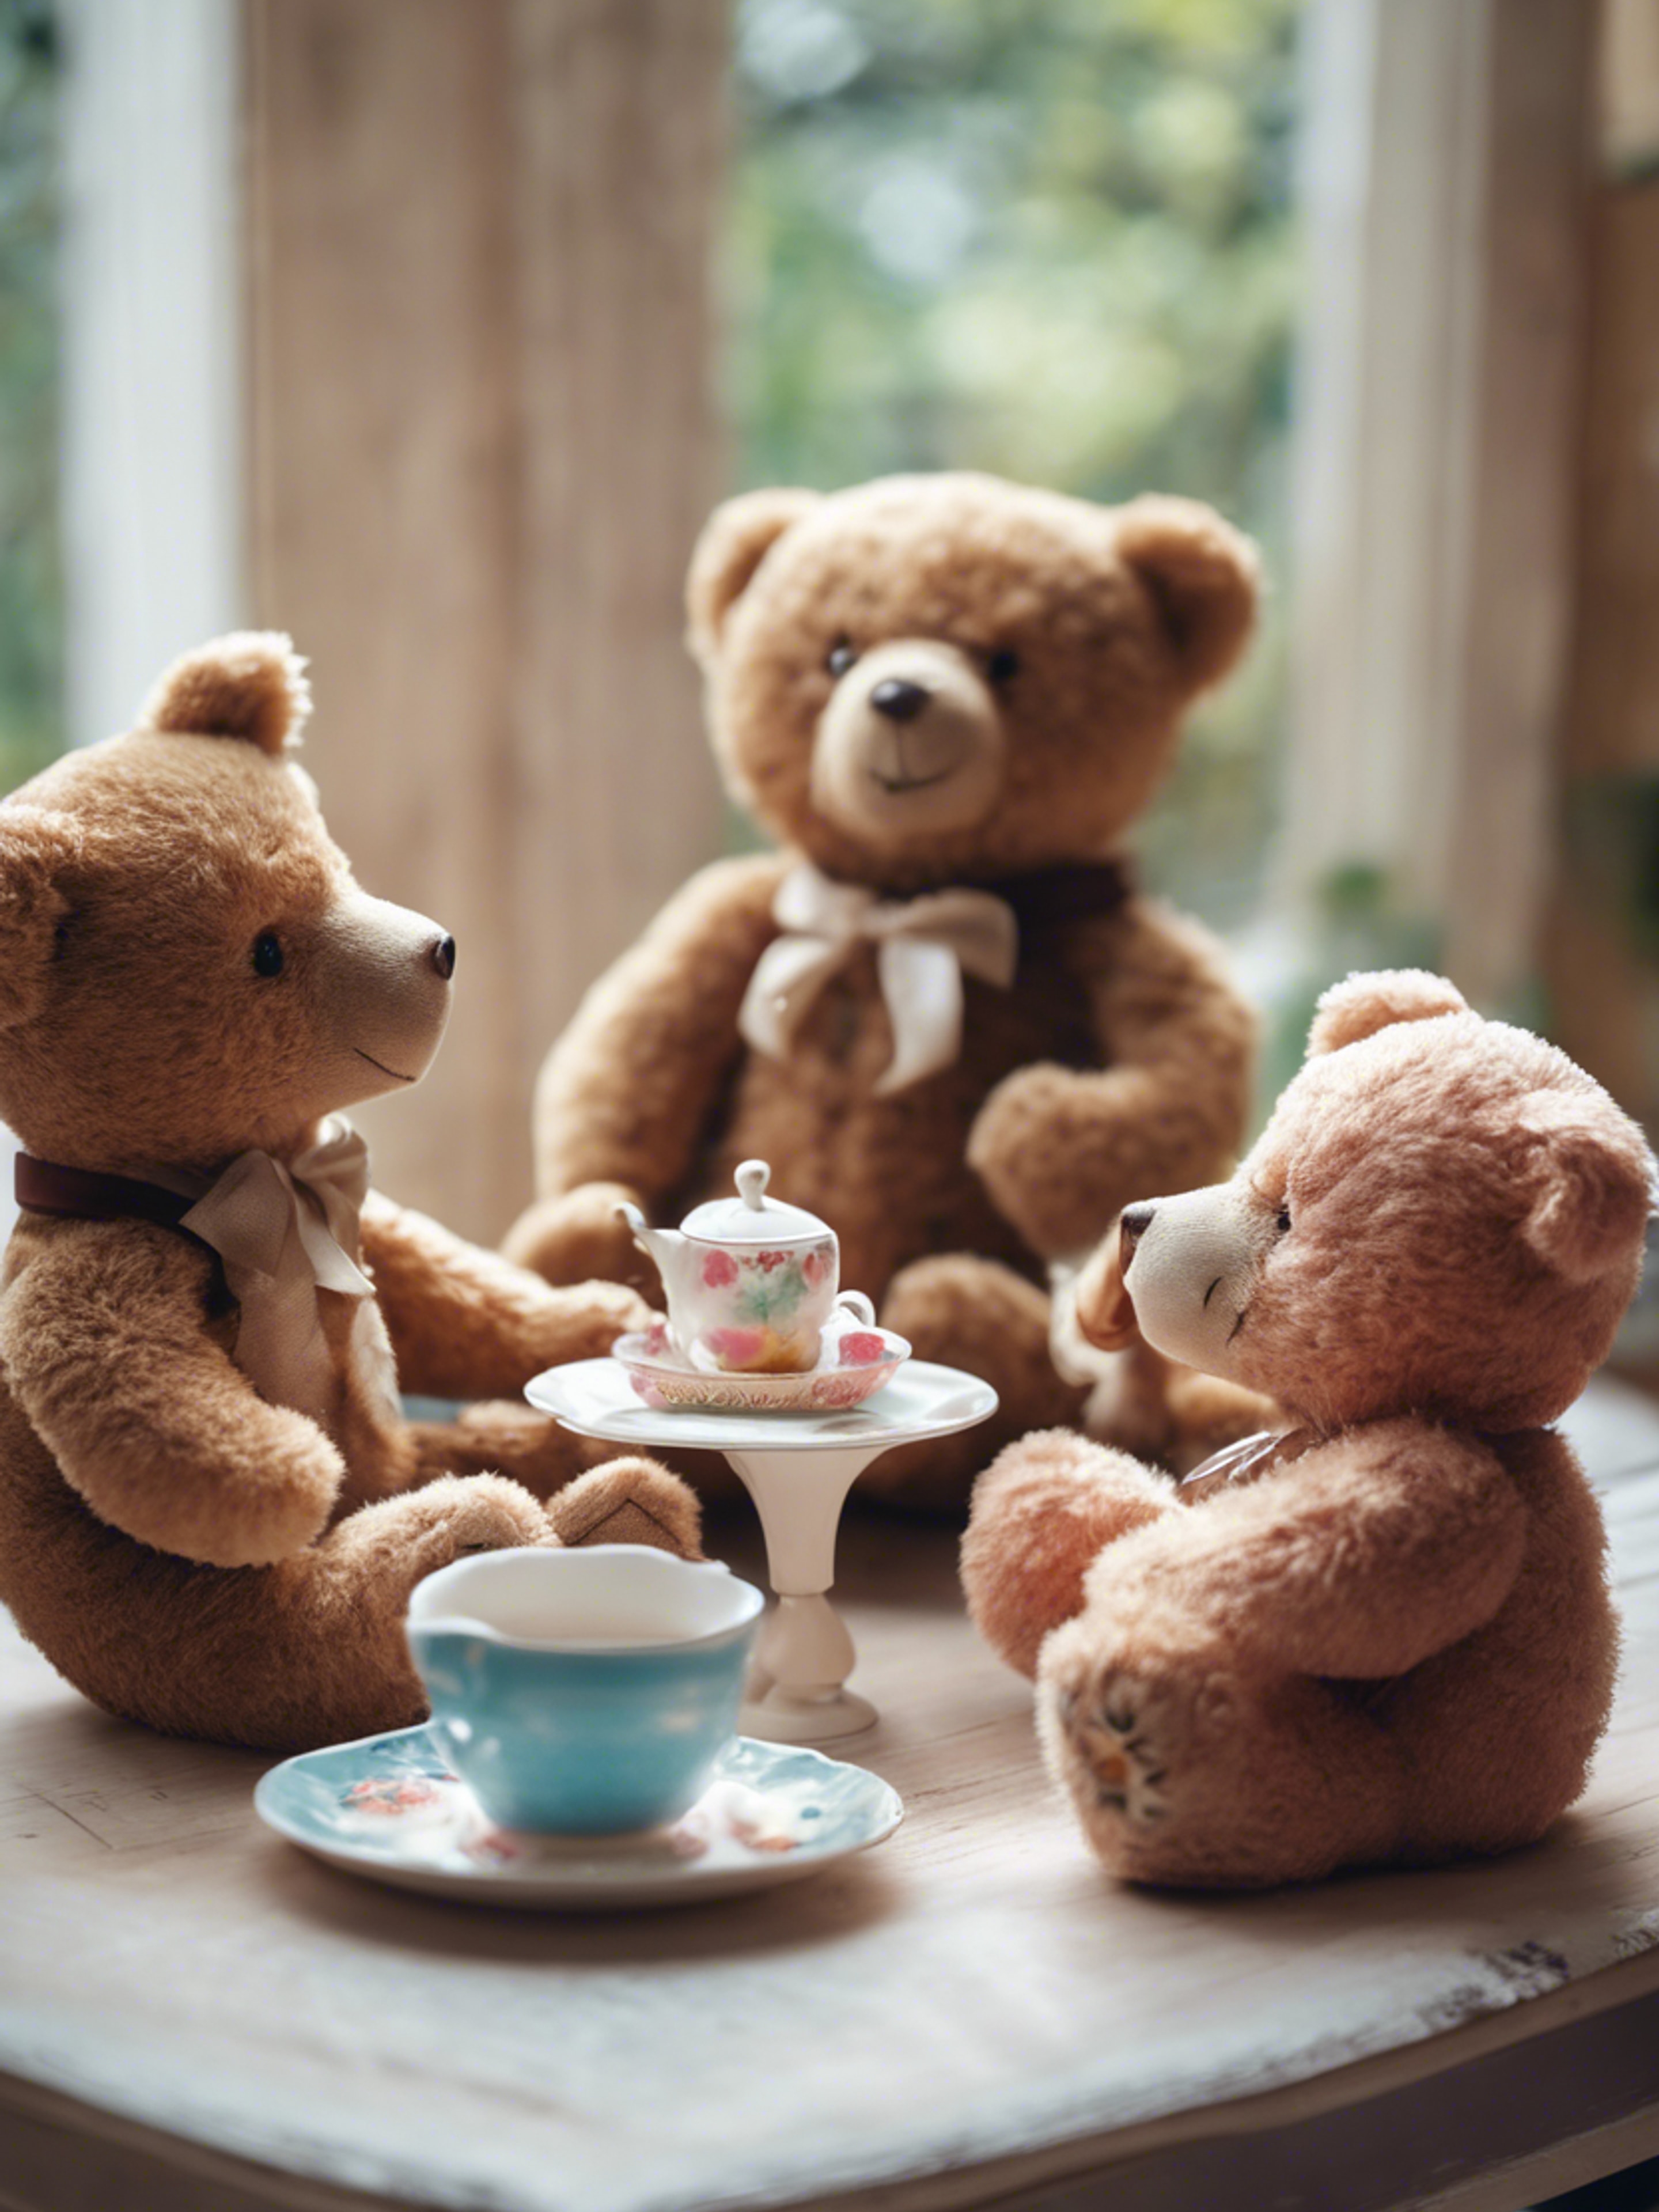 A group of teddy bears having a playful tea party in a child's room. Tapeta na zeď[5c3b9dbbb3984ccebf50]